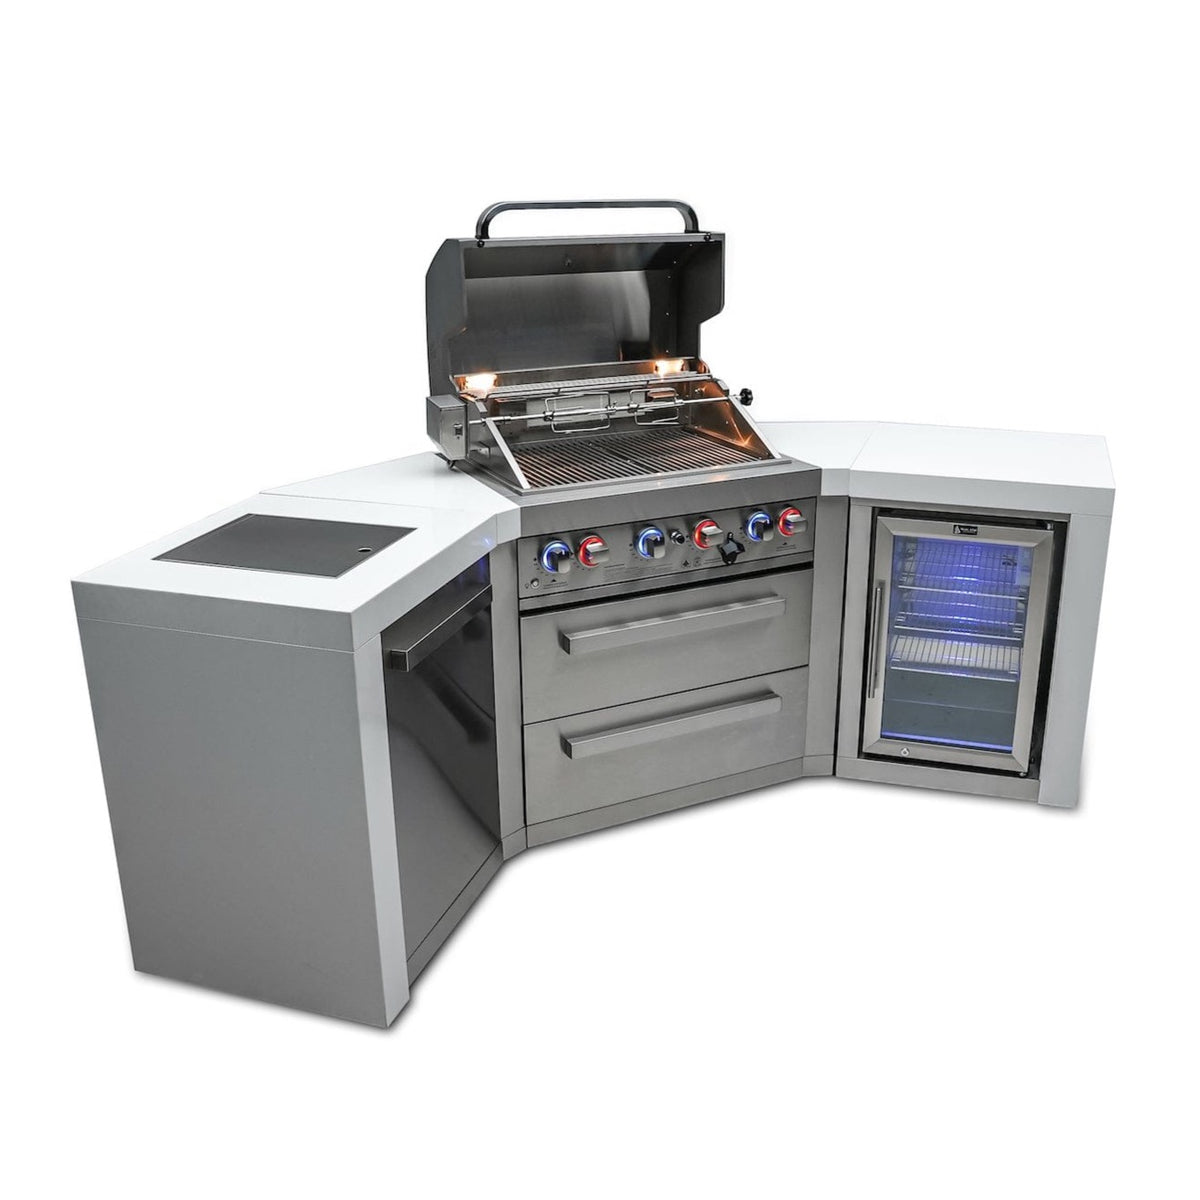 Mont Alpi Islands Mont Alpi 400 Deluxe Island with Fridge Cabinet + Two 45 Degree Corners / 4-Burner Grill, 2 Infrared Burners, Fridge, Stainless Steel / MAi400-D45FC